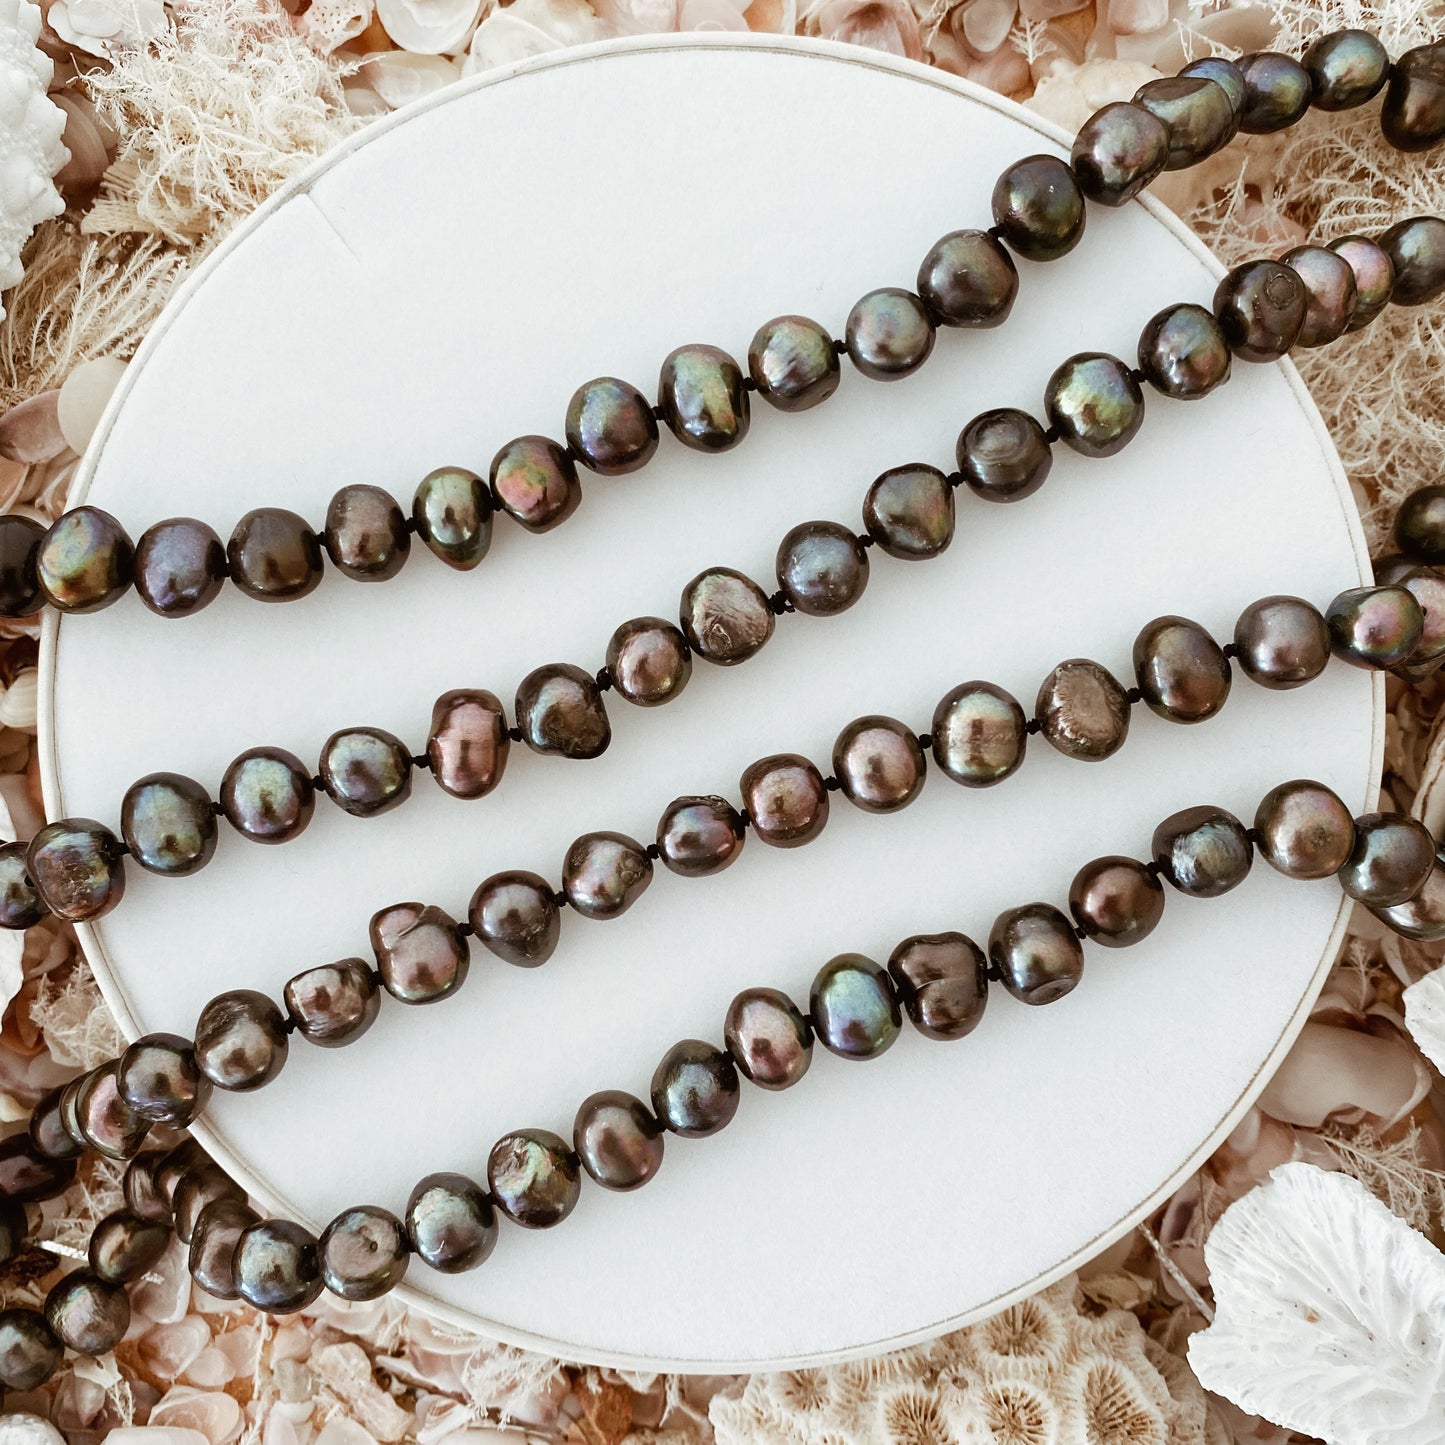 “Longstrand’ Pearl Necklace  Peacock black Cultured Freshwater Pearls 160cm